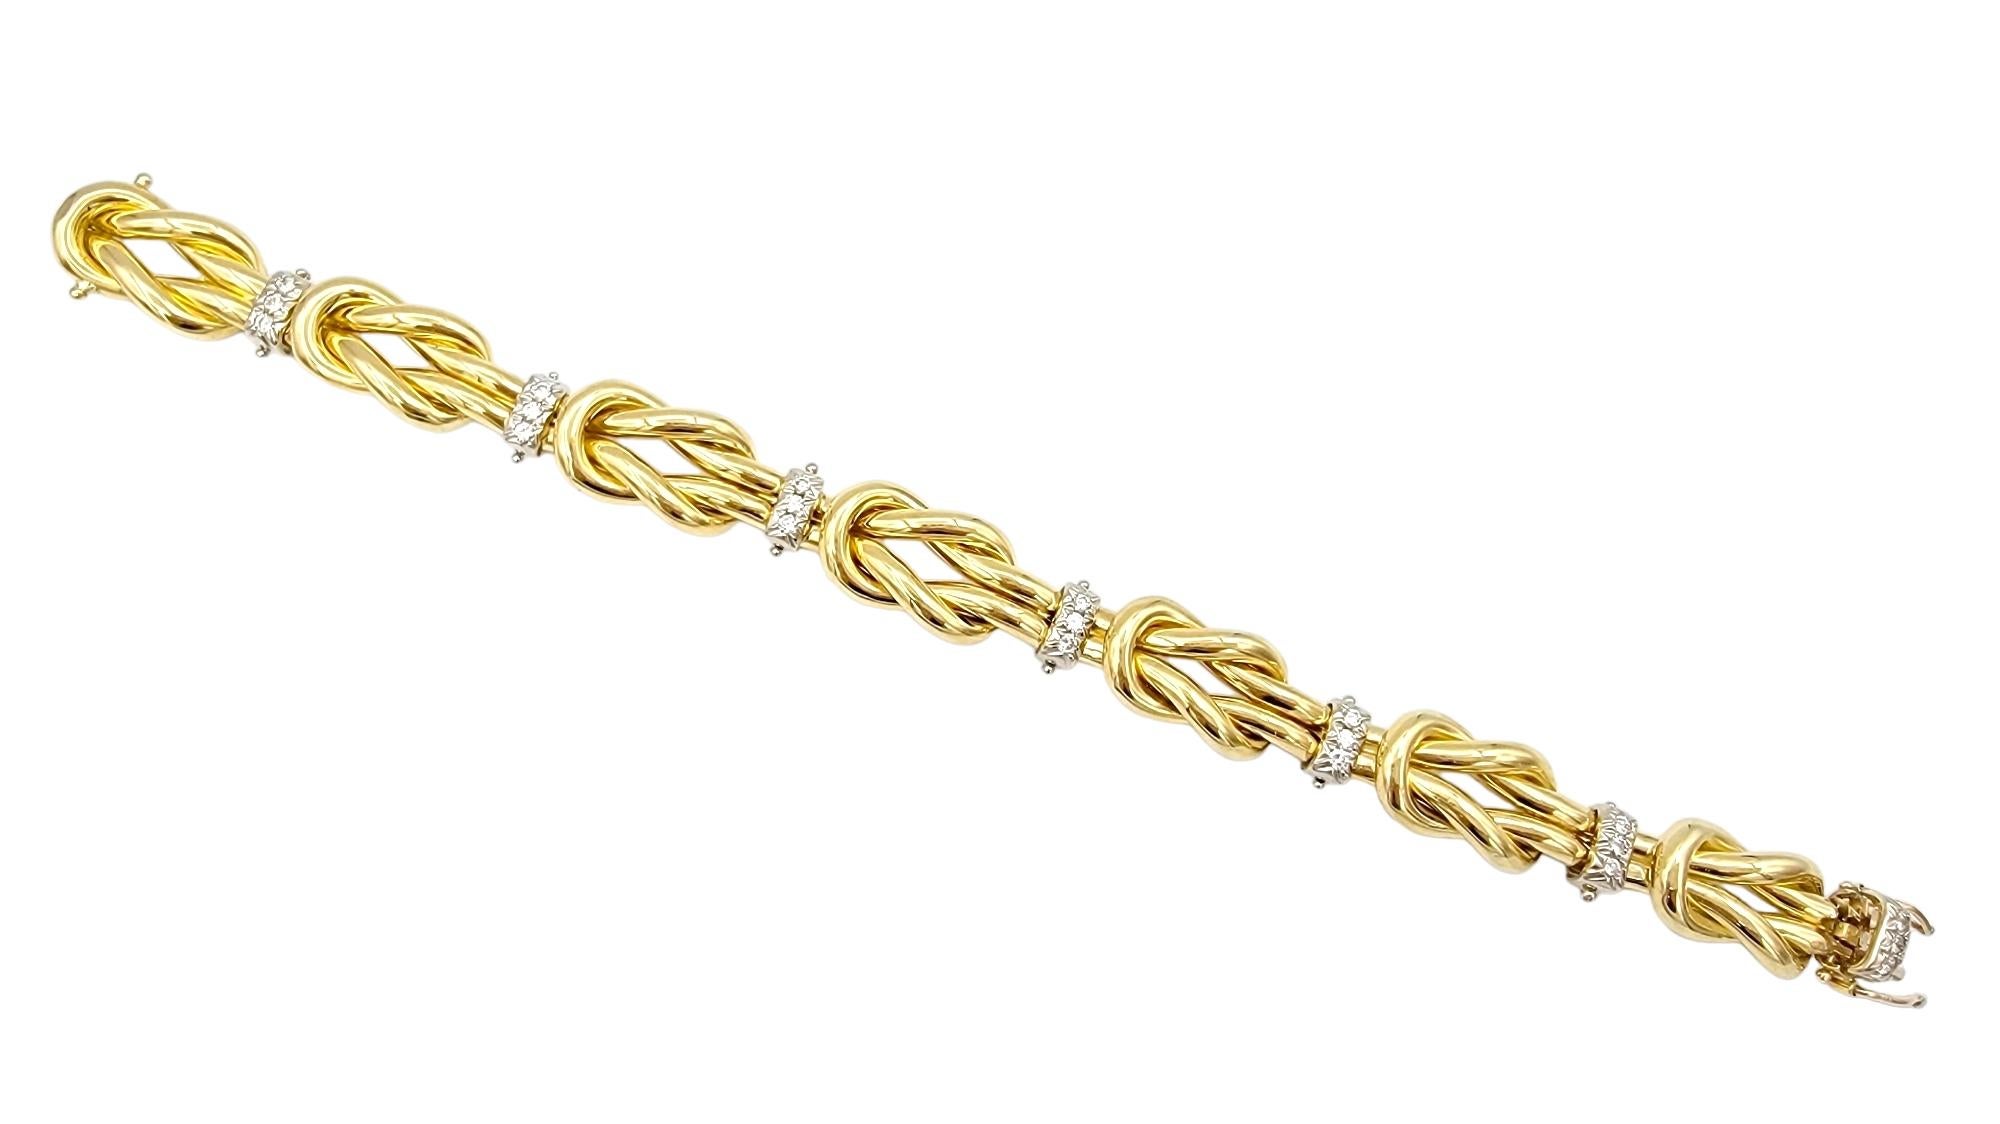 This exquisite 18 karat gold link bracelet is a true testament to the art of jewelry design, combining elegance and boldness in this larger statement bracelet that demands attention. The central theme of this bracelet is the intricate love knot